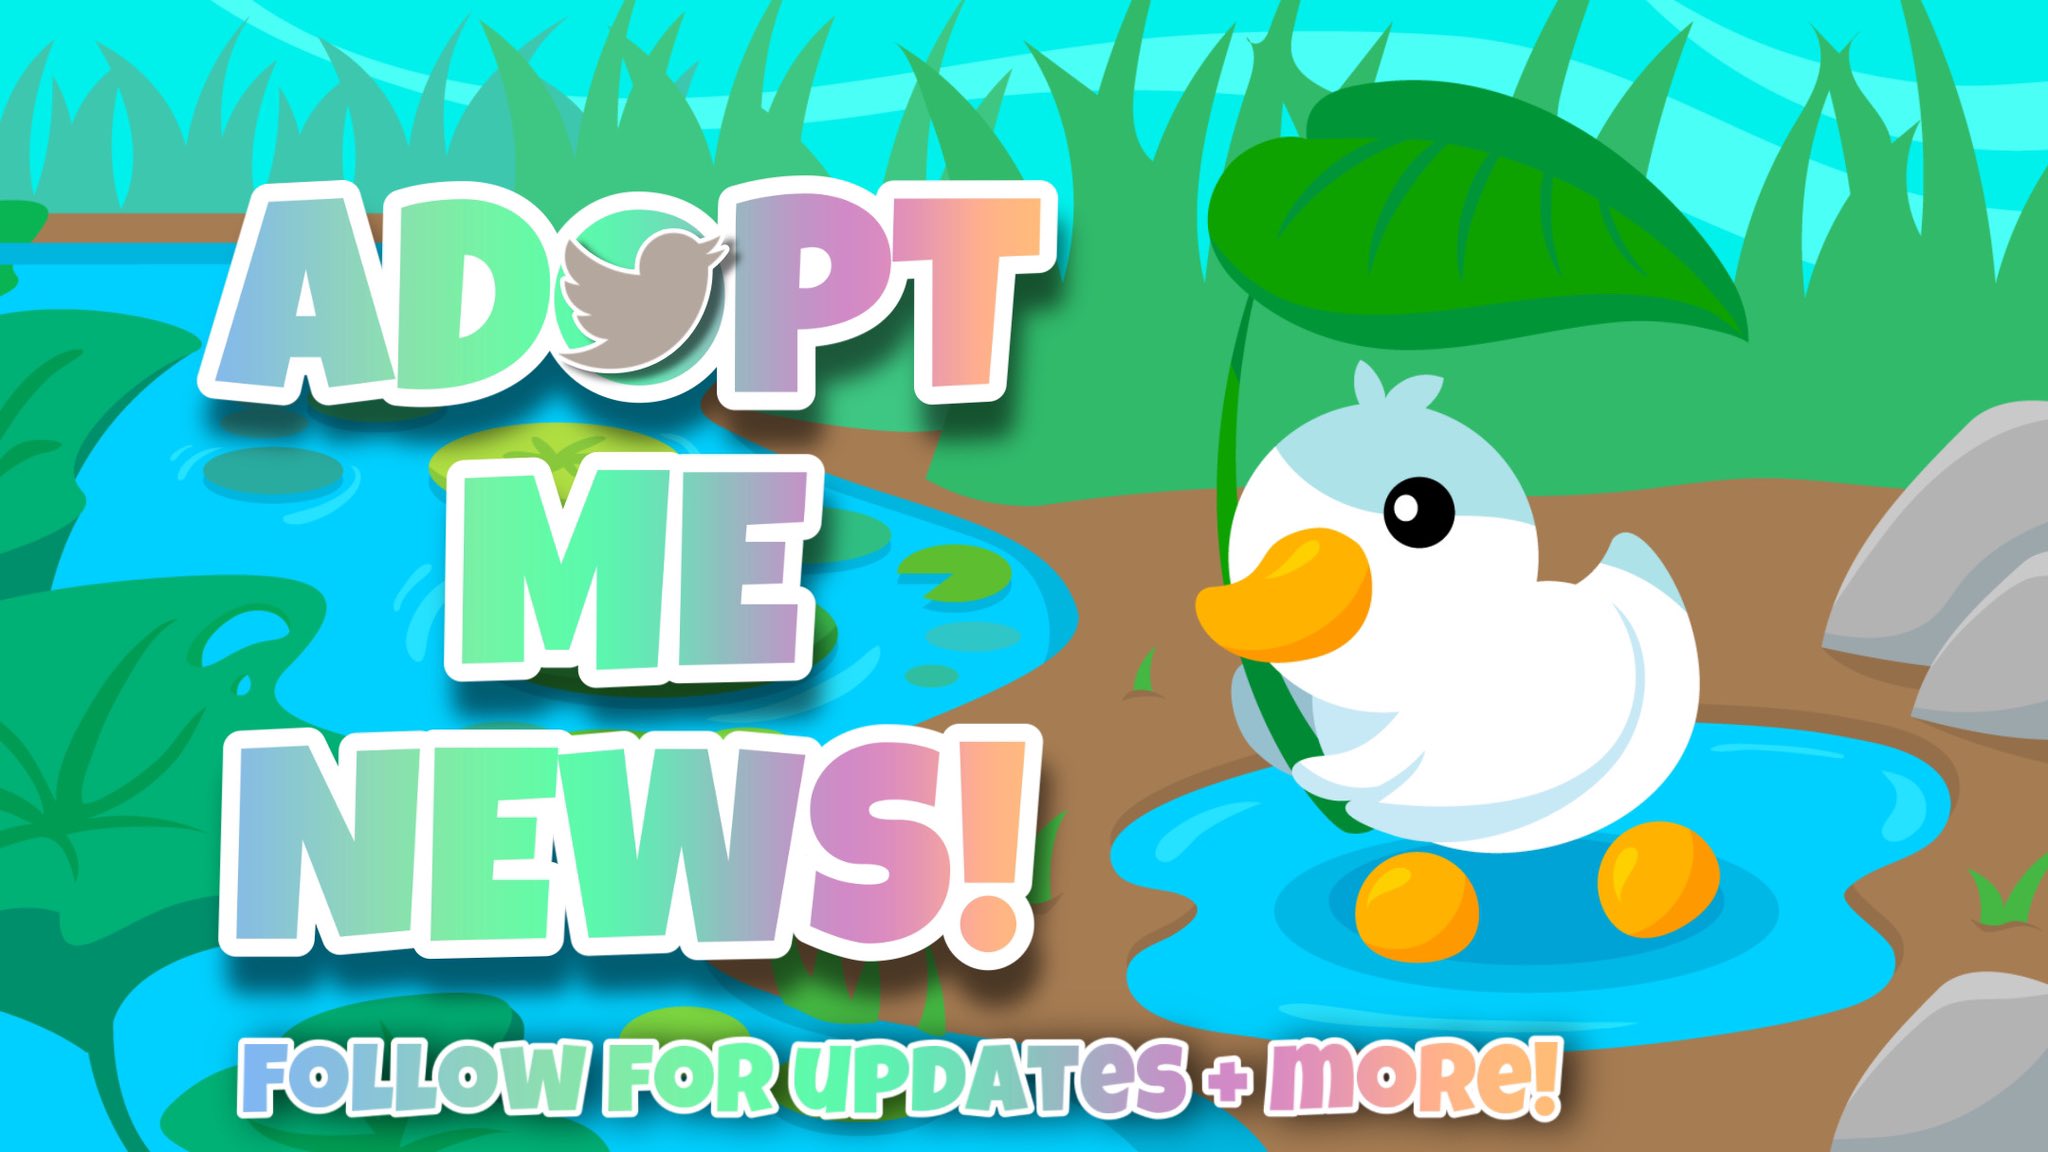 All NEW Adopt Me Halloween Pets 2023 Update! 